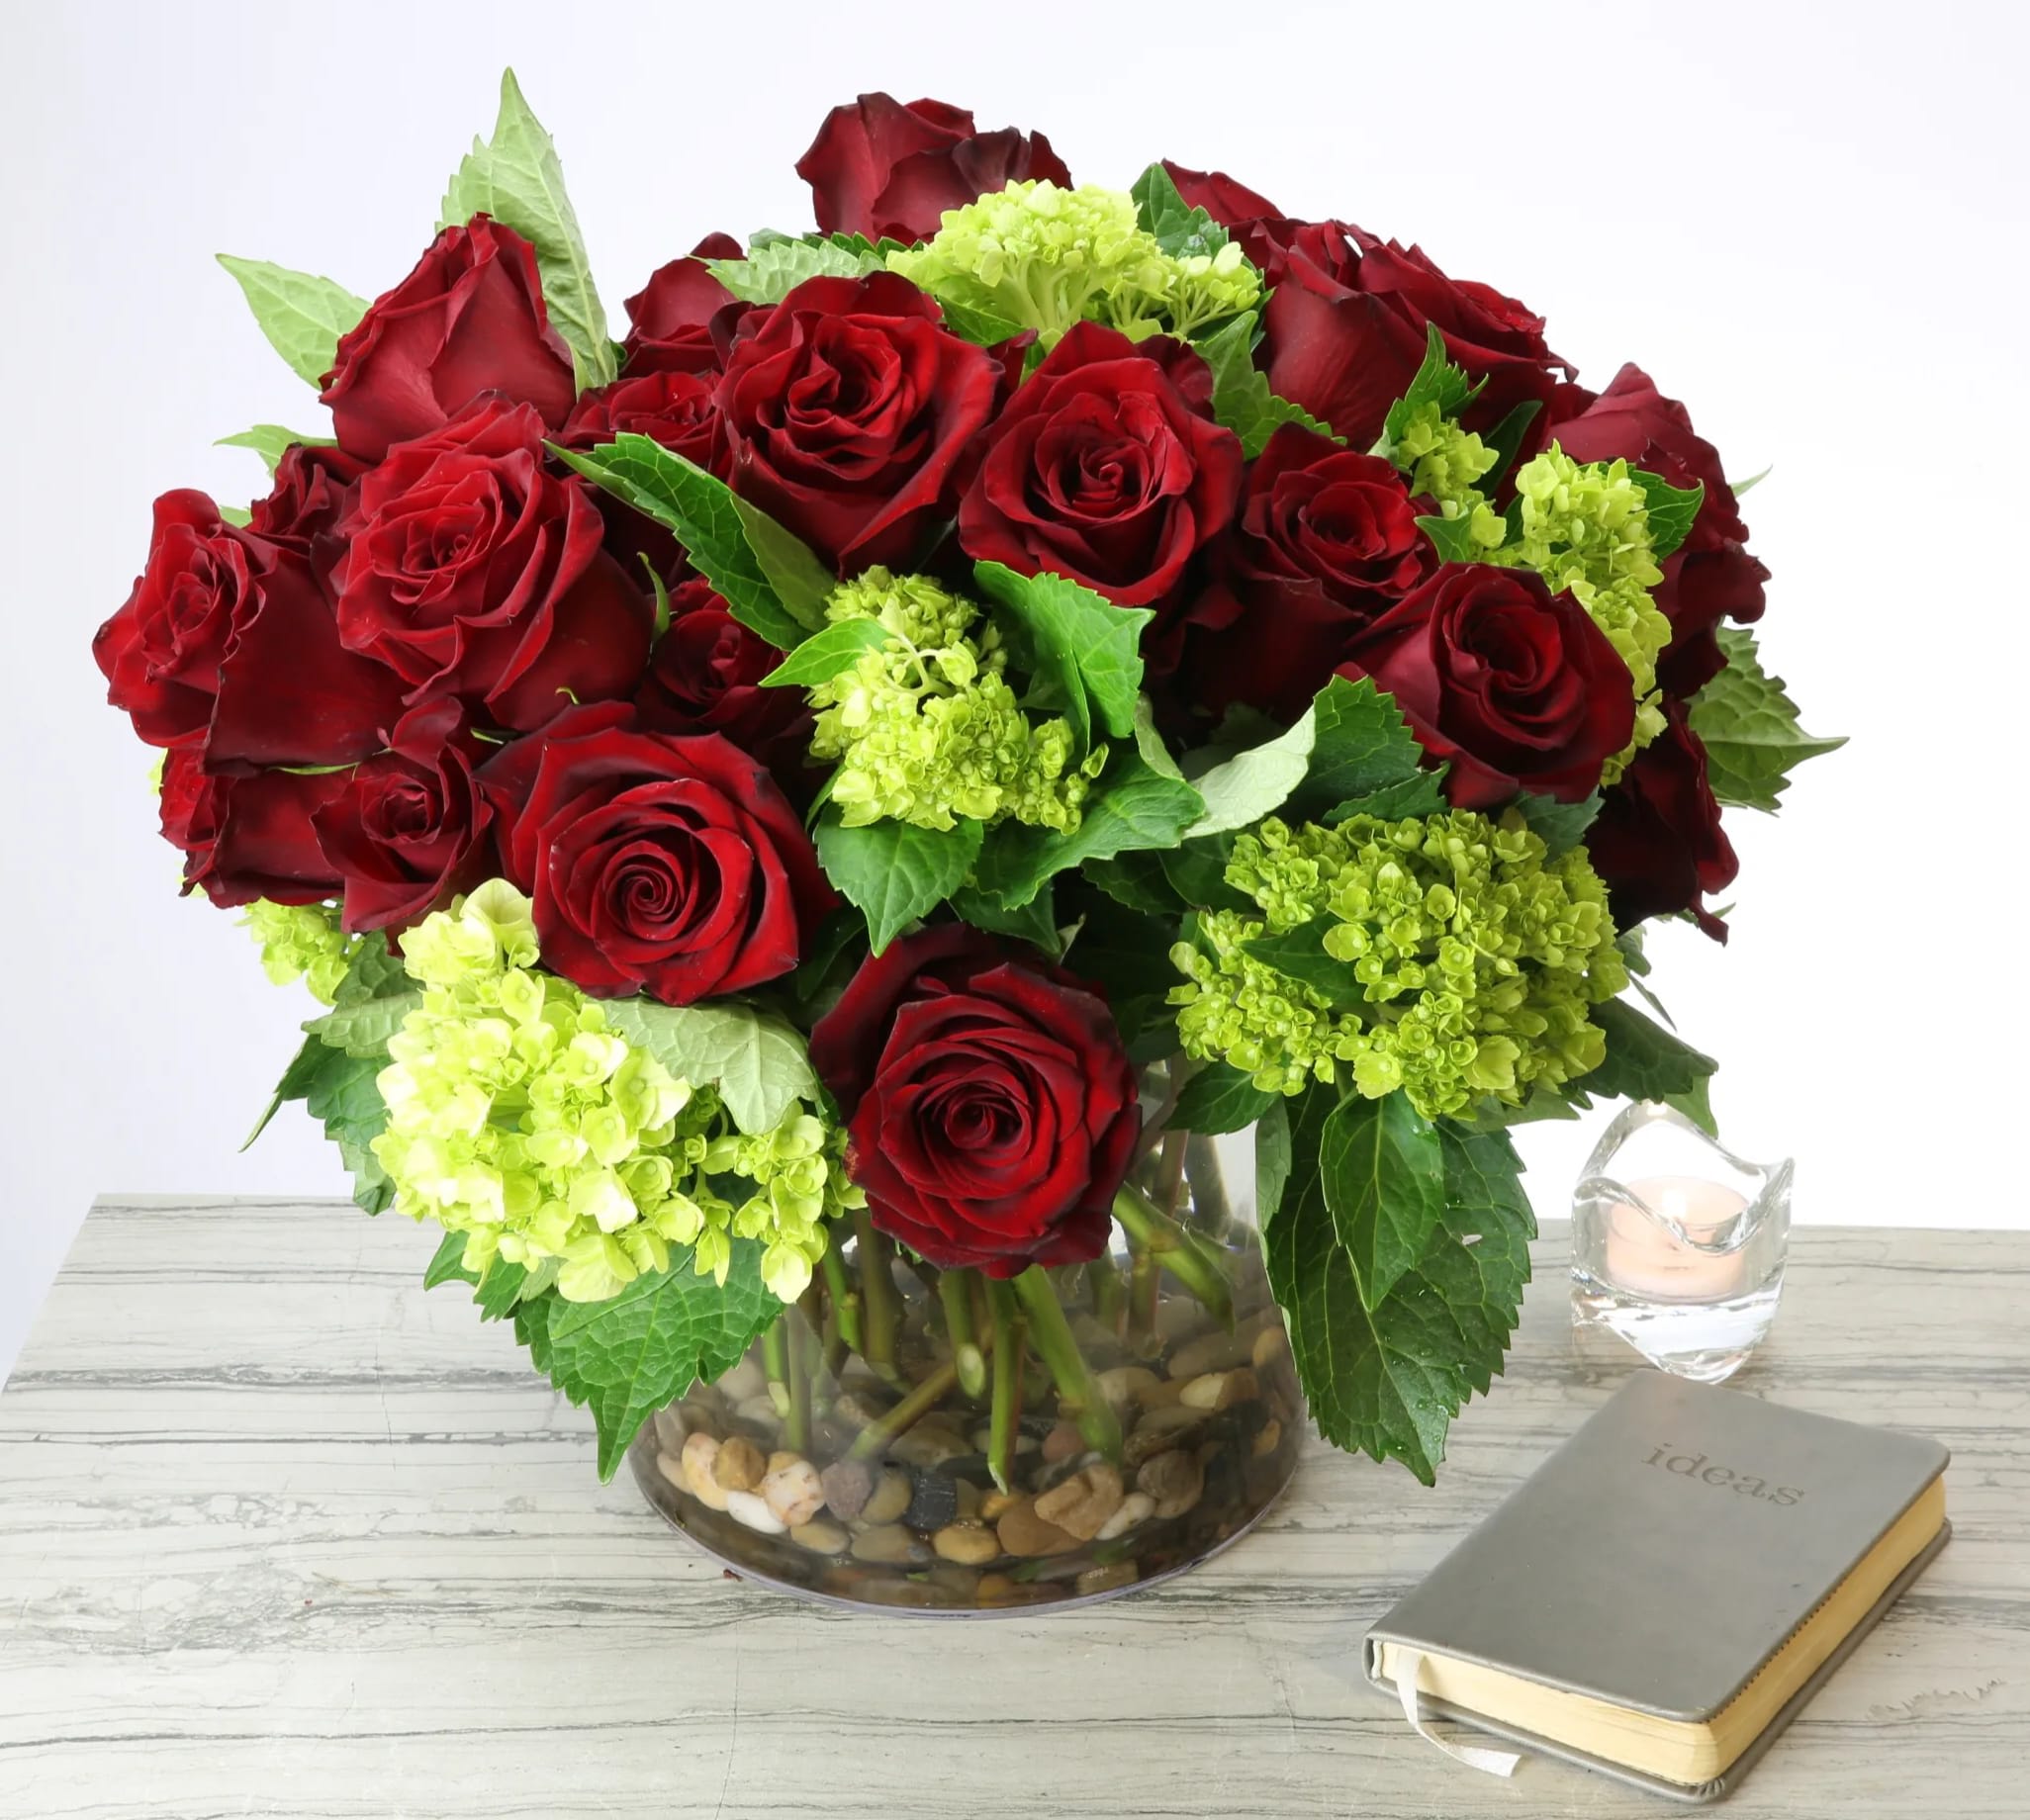 Sweet and Sour - This lovely arrangement features 2 Dozen vibrant Ecuadorian red Roses clustered in a round bouquet contrasted with scattered mini bunches of lime Hydrangeas and seasonal greens. A stunning arrangement that can be a great winter holiday gift or table centerpiece. 6X6&quot; glass vase. 12&quot; round.   Deluxe: 3 dozen roses  Premium: 4 dozen roses